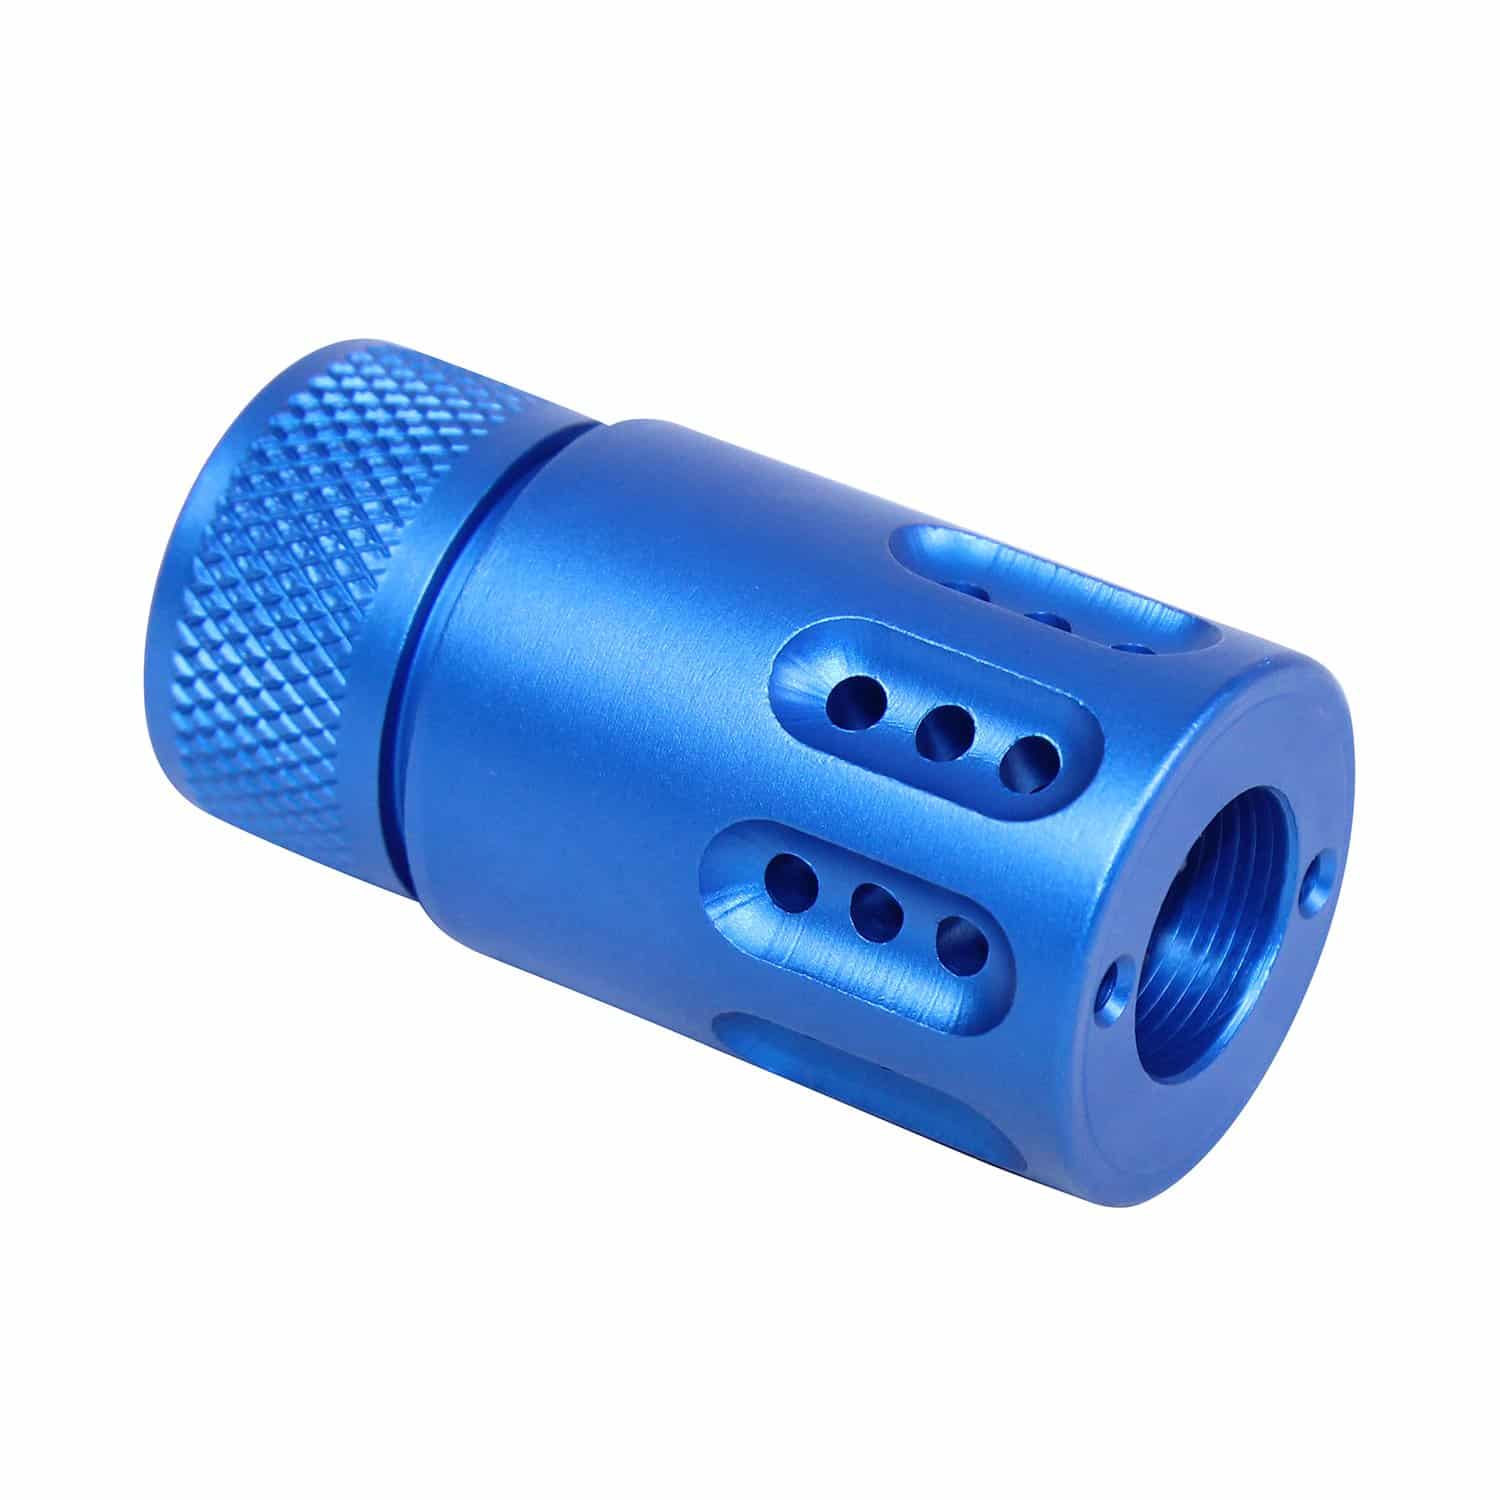 AR .308 caliber muzzle brake and shroud in anodized sapphire blue